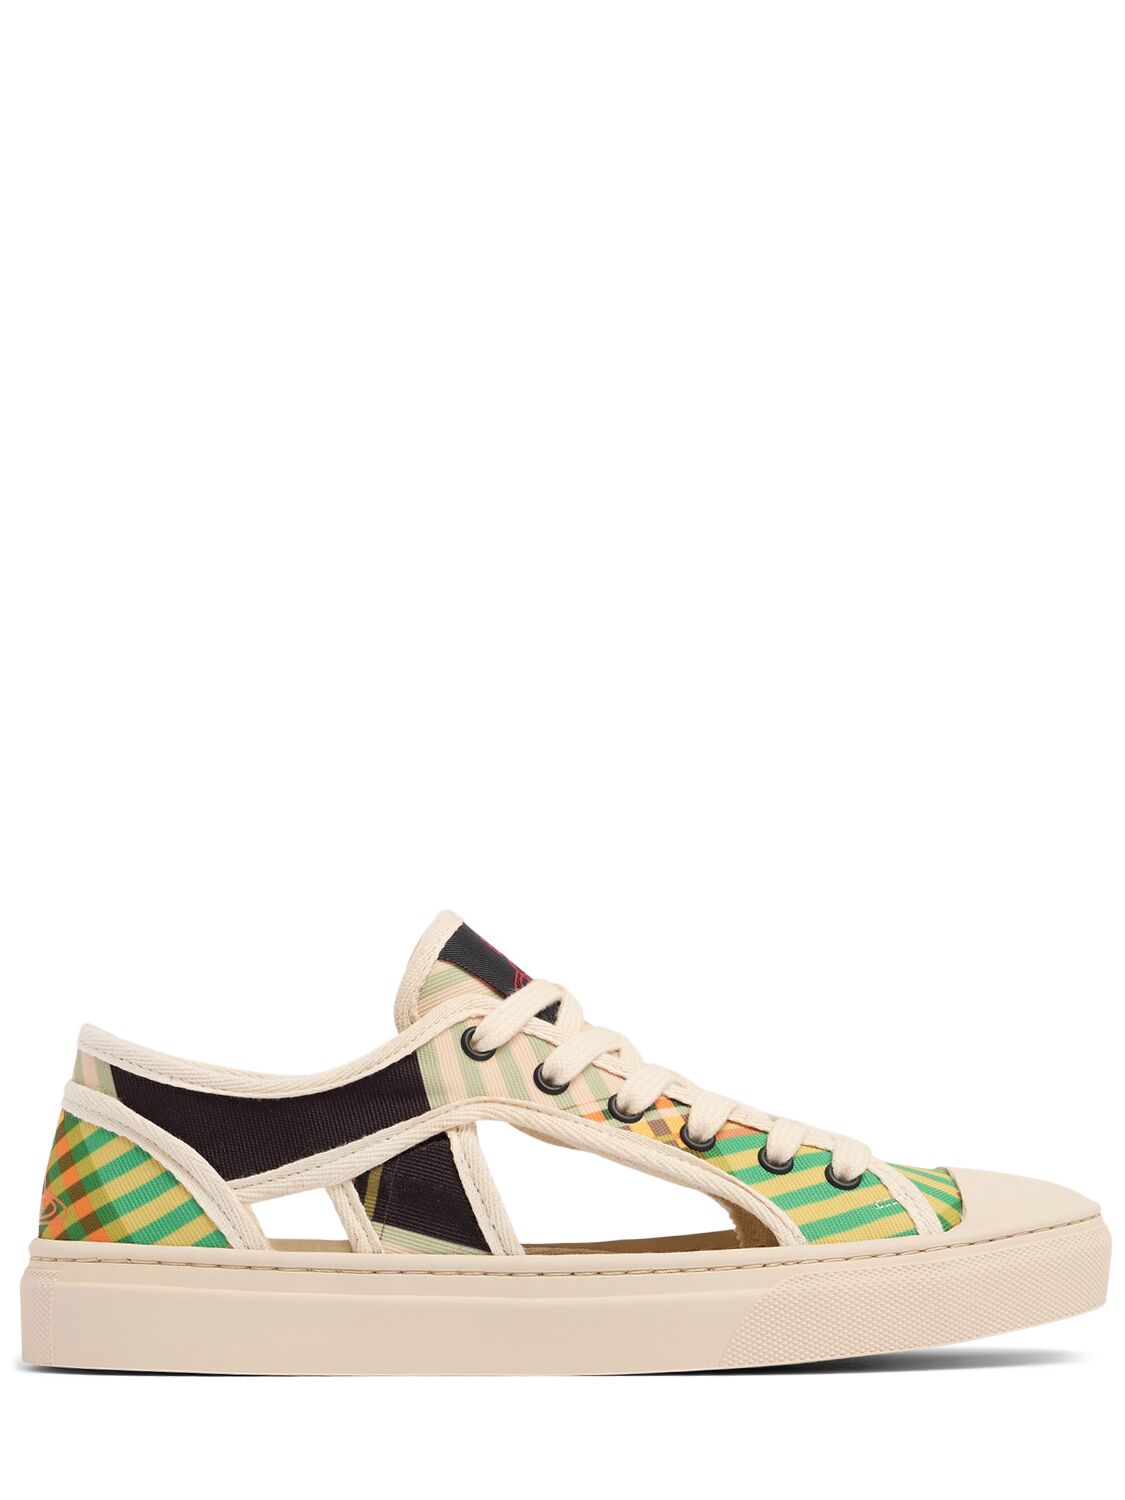 Vivienne Westwood Lvr Exclusive Brighton Leather Trainers In Multicolor